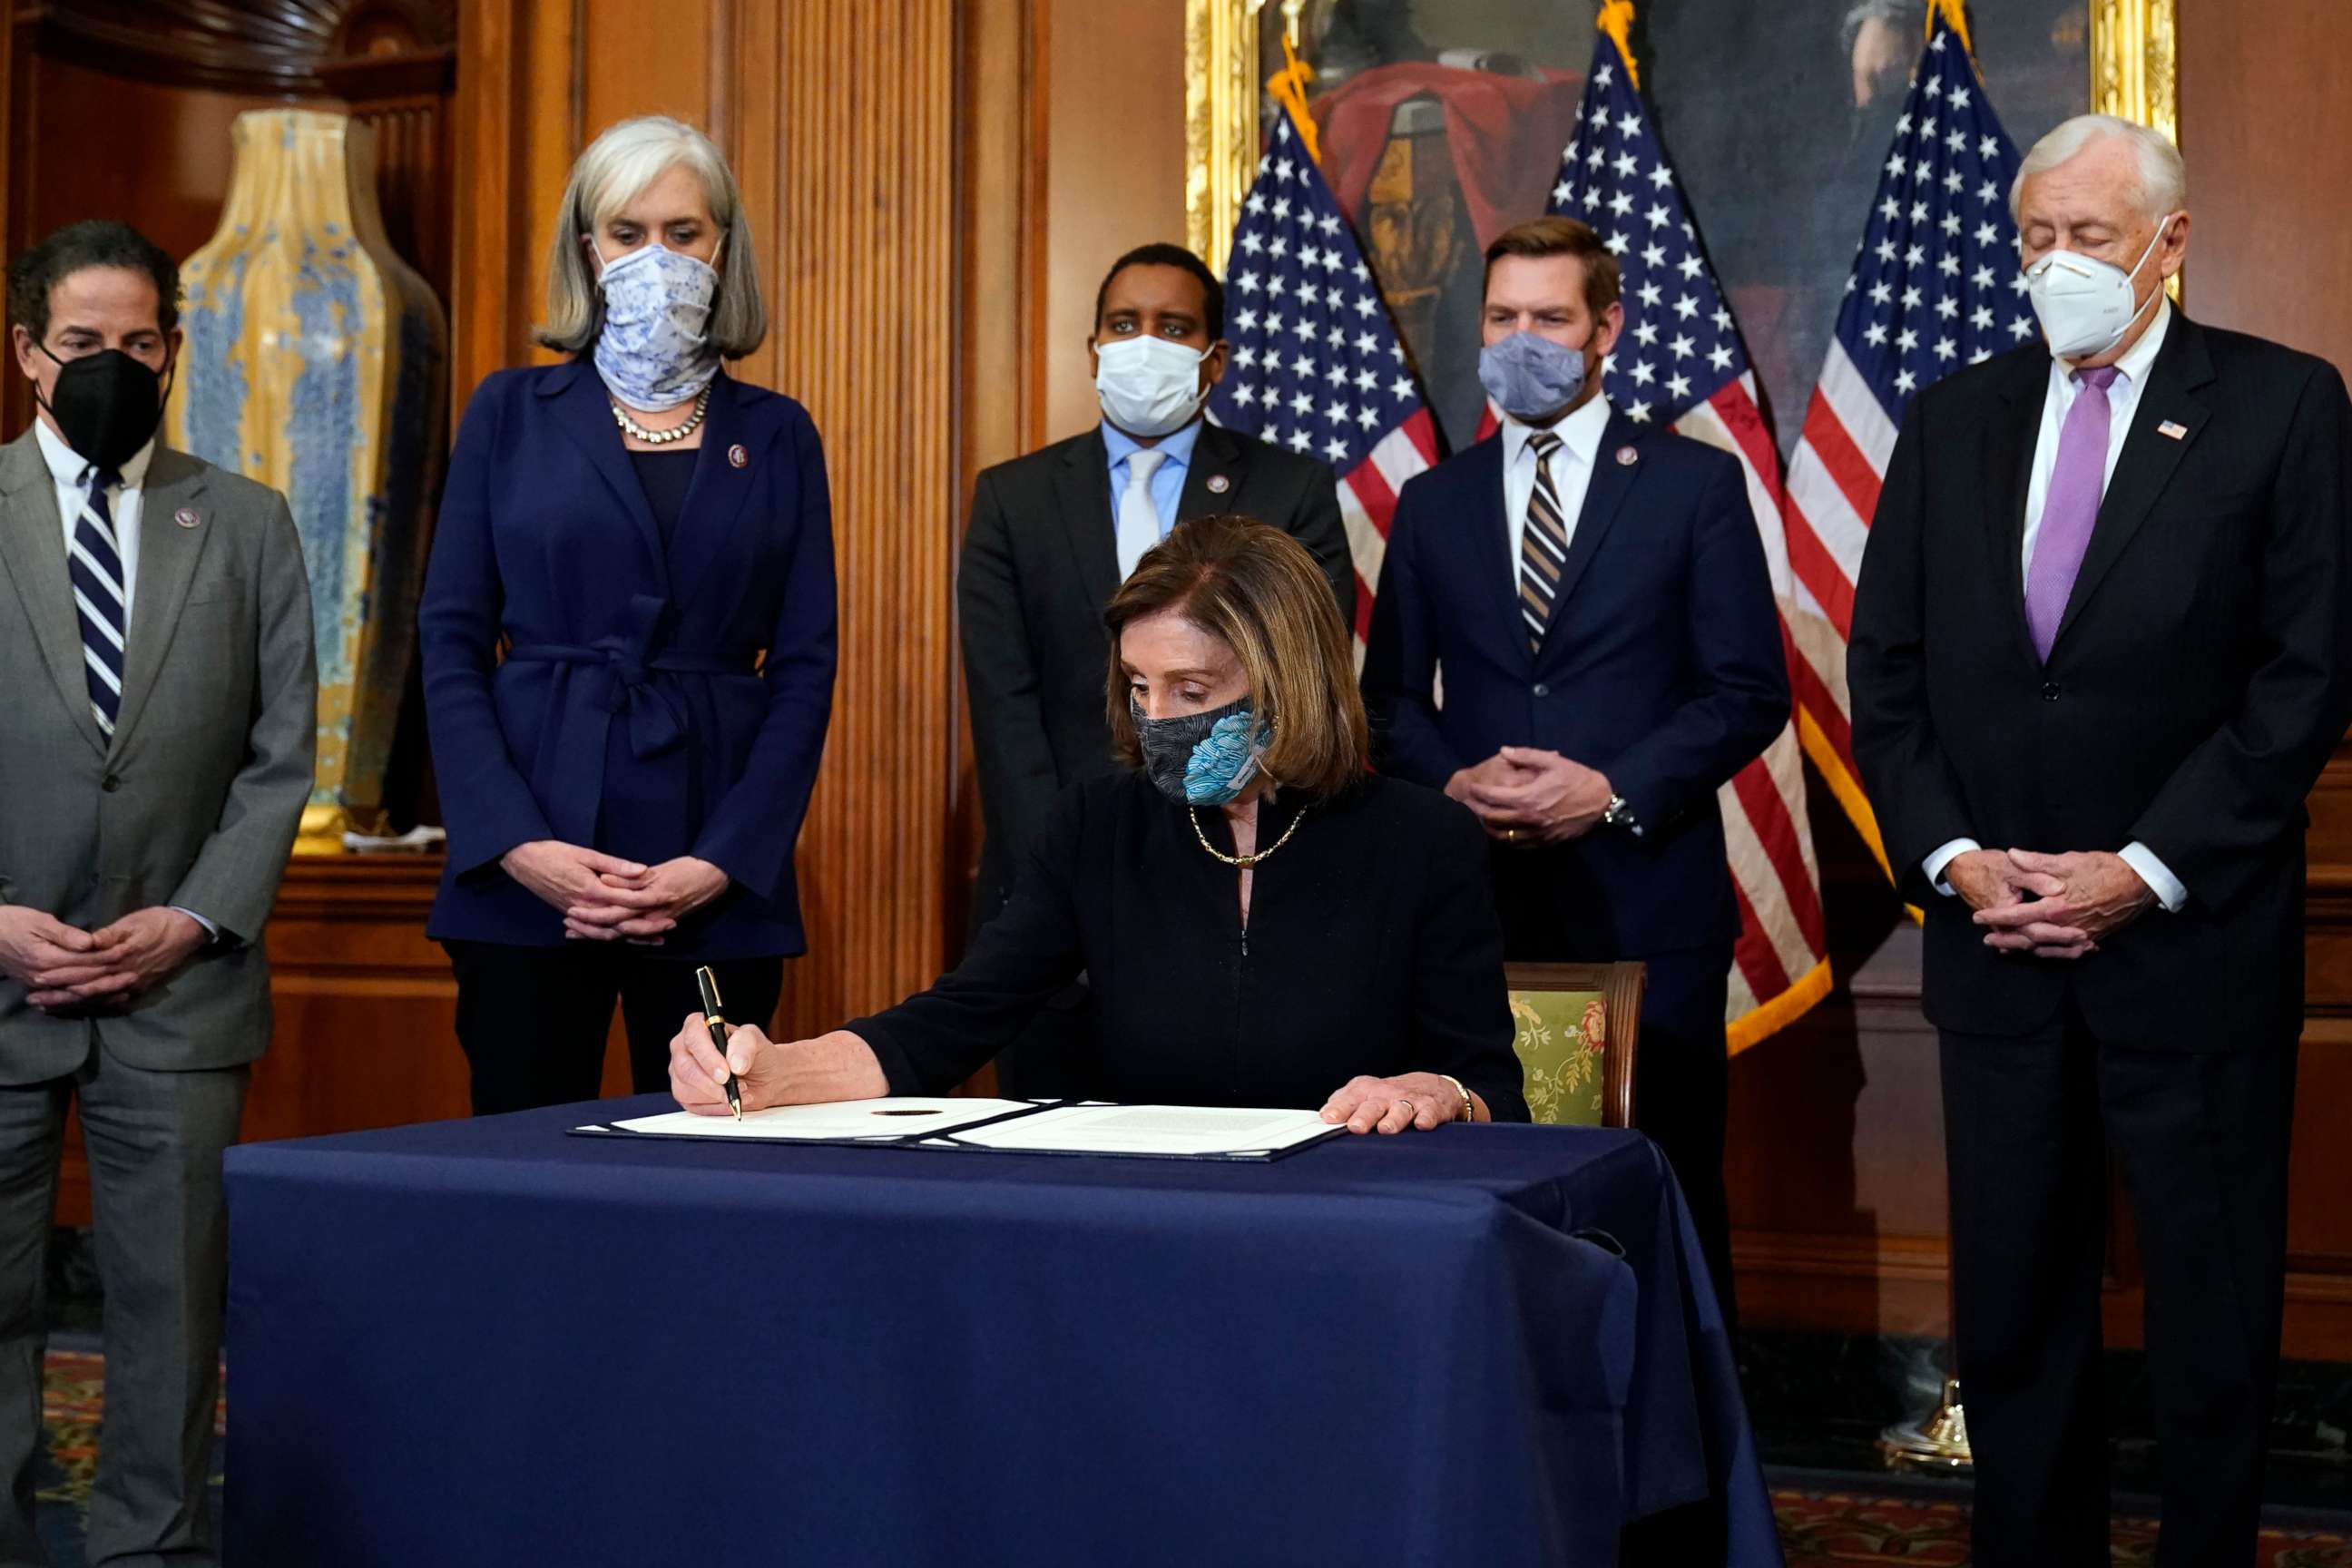 PHOTO: House Speaker Nancy Pelosi signs the articles of impeachment against President Donald Trump in an engrossment ceremony before transmission to the Senate for trial on Capitol Hill, in Washington, Jan. 13, 2021.